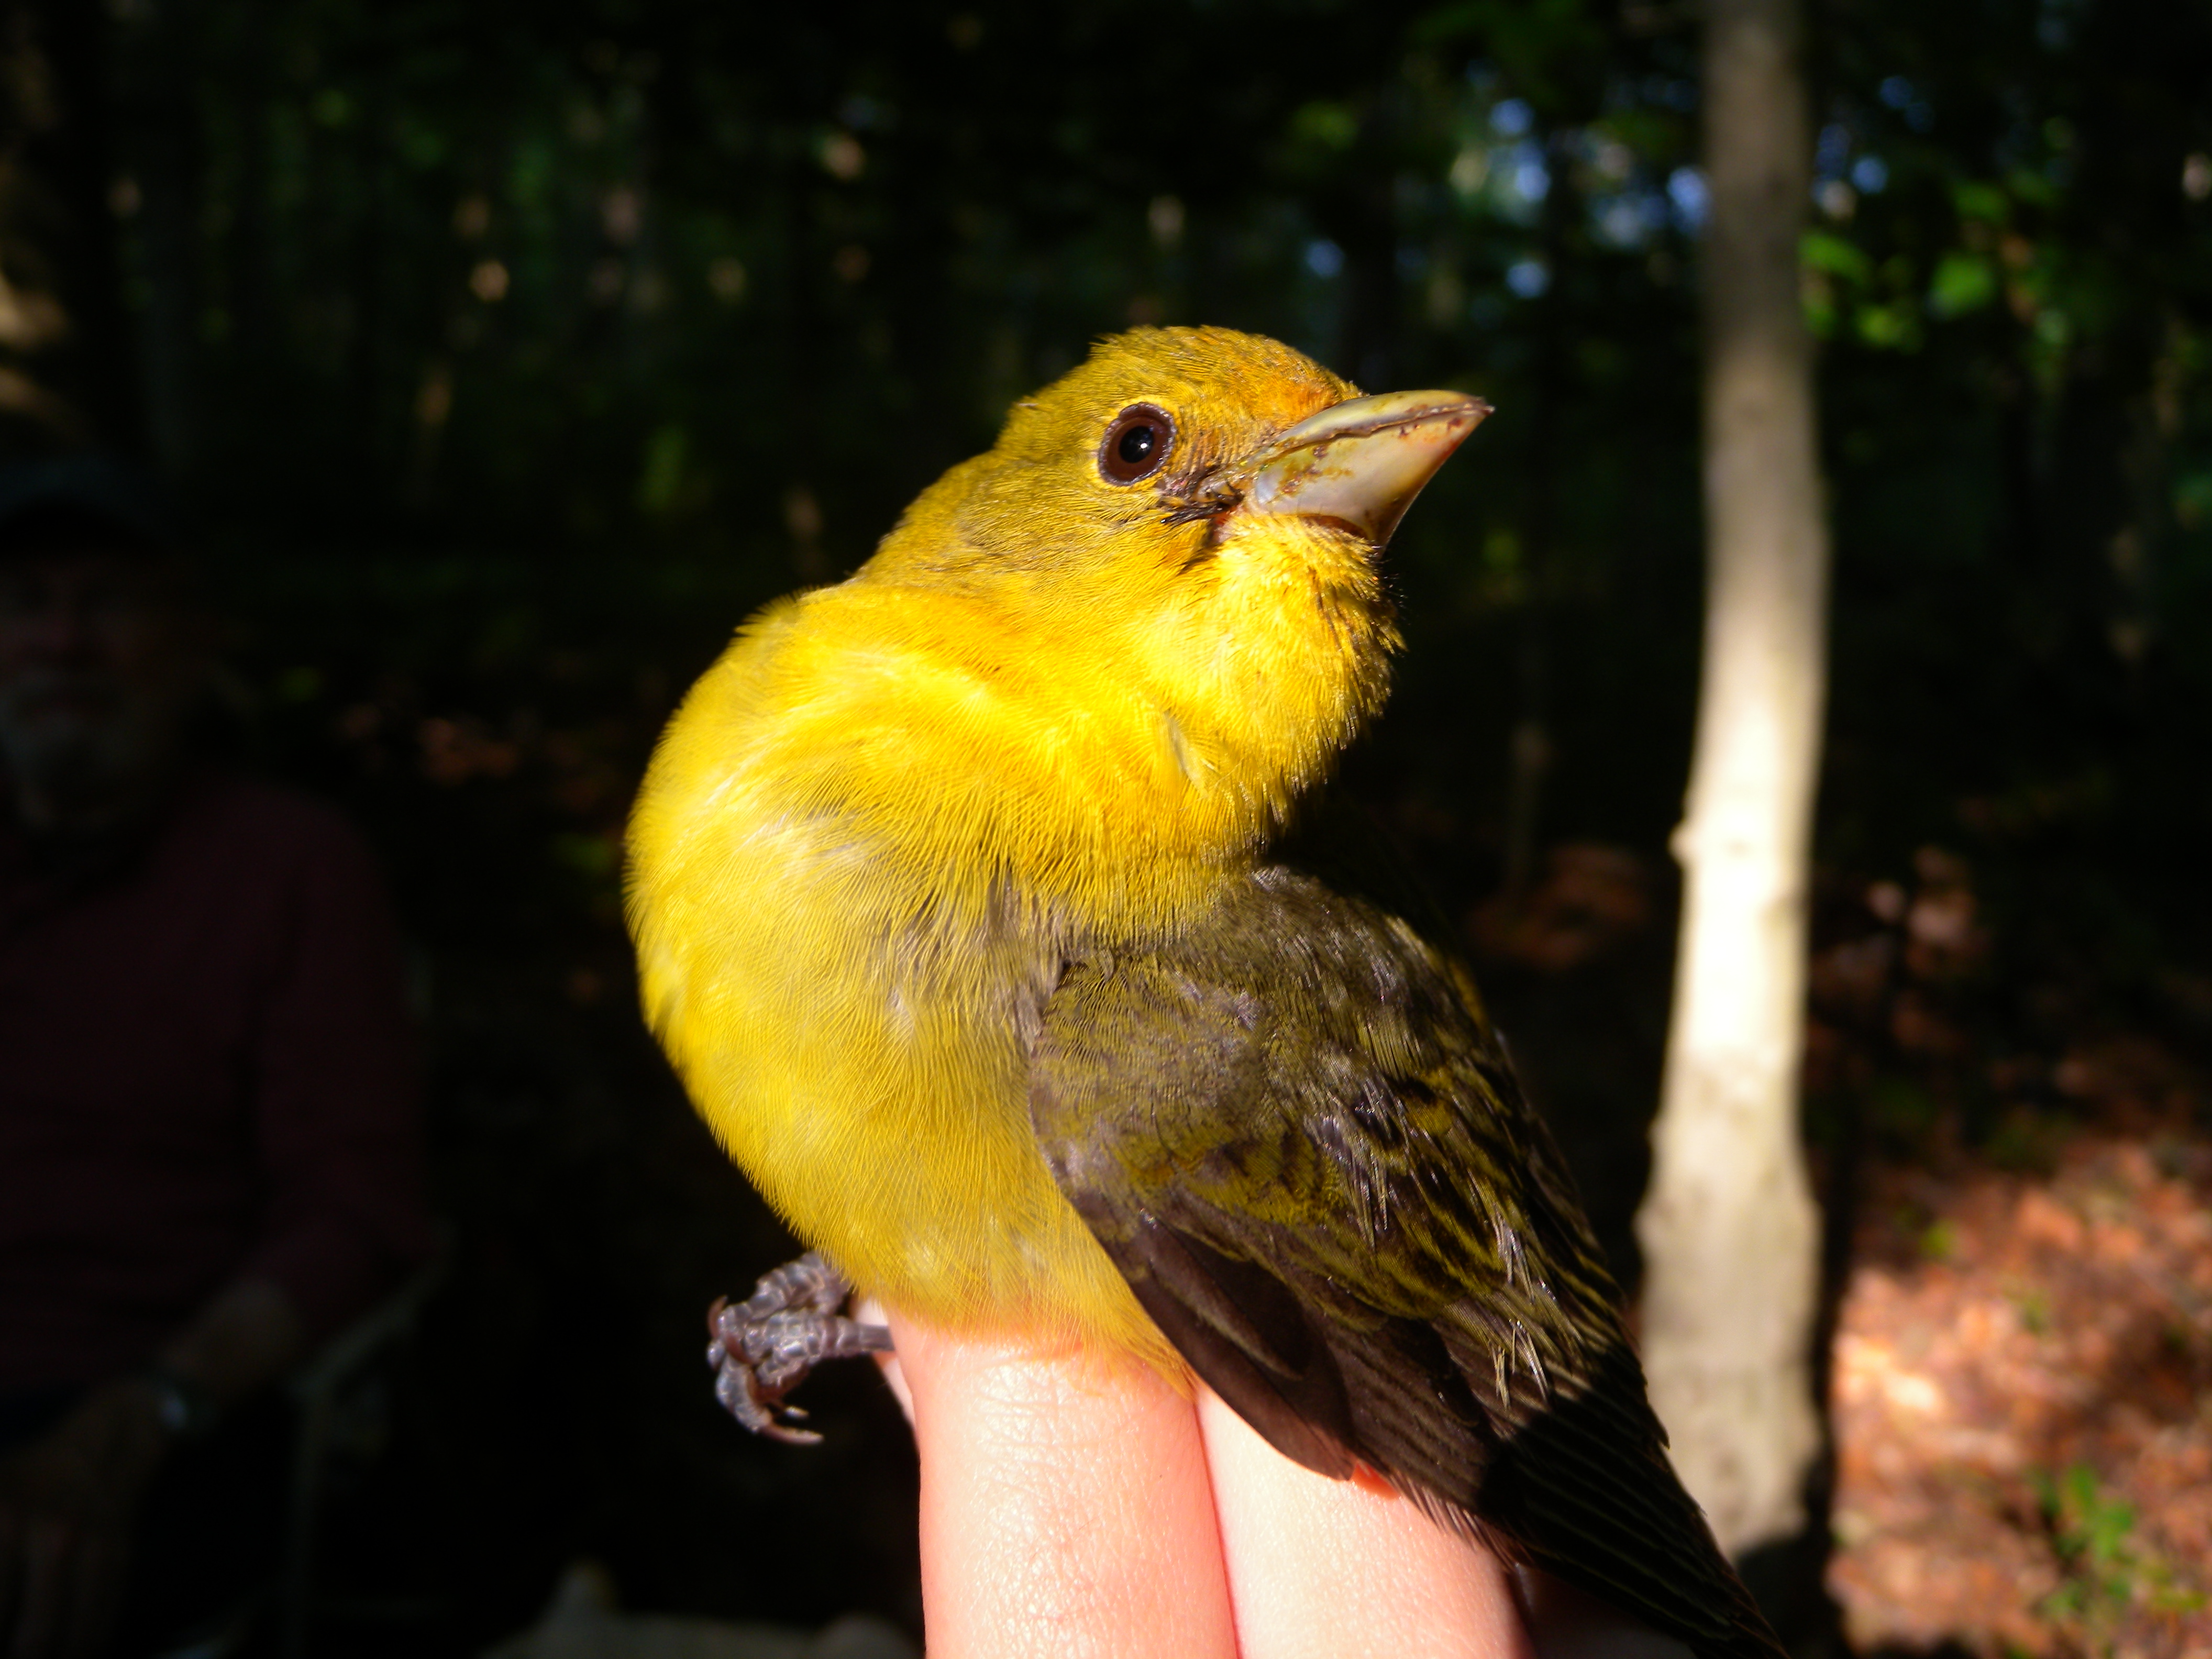 Adult female Scarlet Tanager.  Photo by Blake Goll